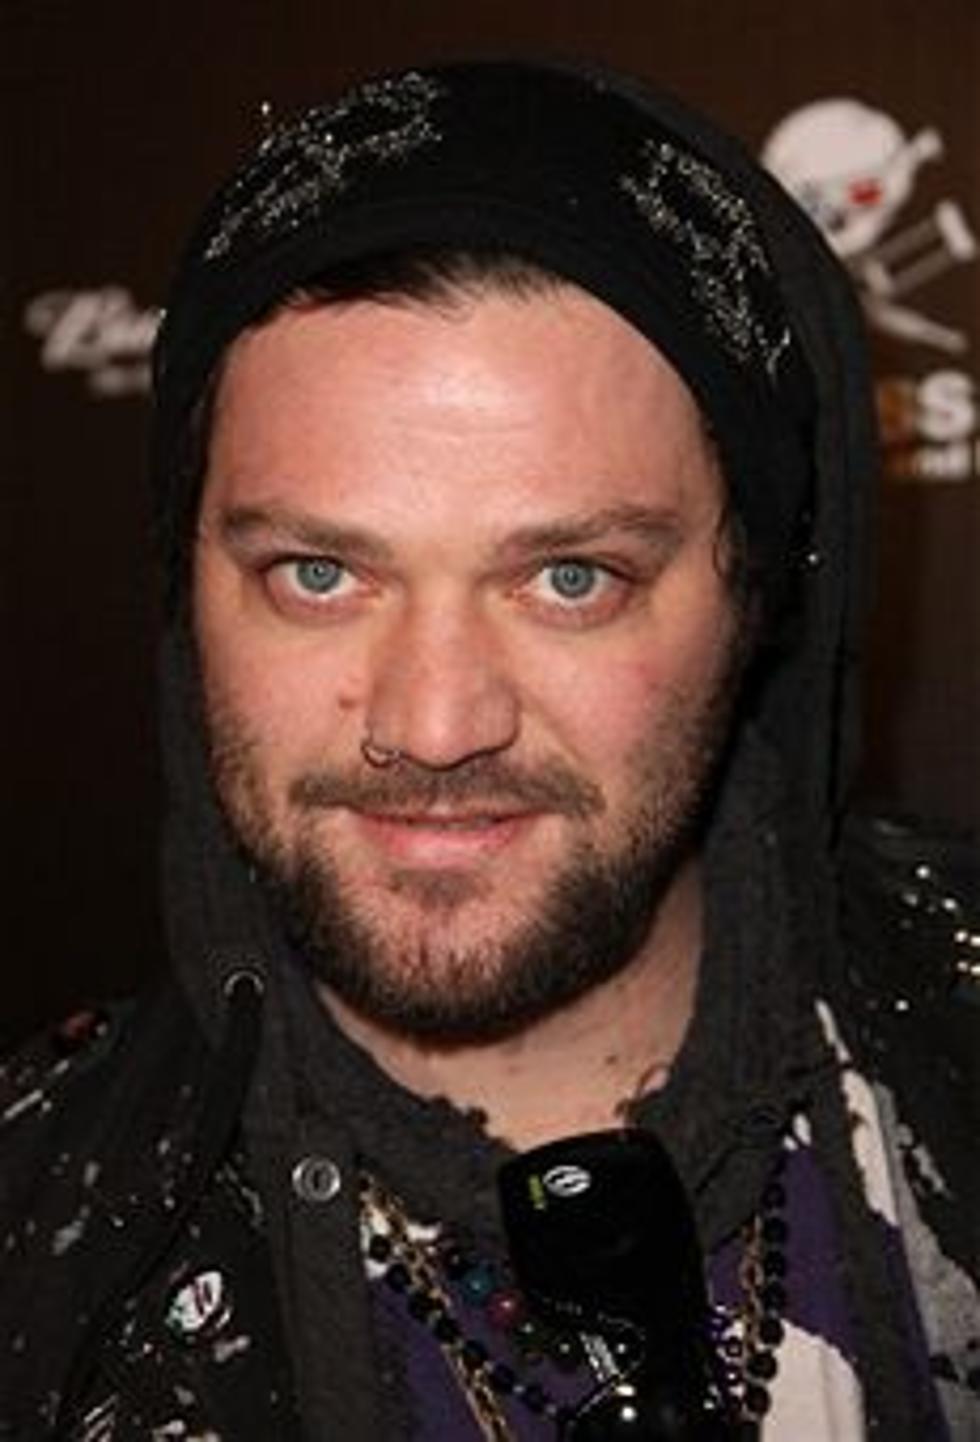 Bam Margera Hospitalized With Serious Injuries